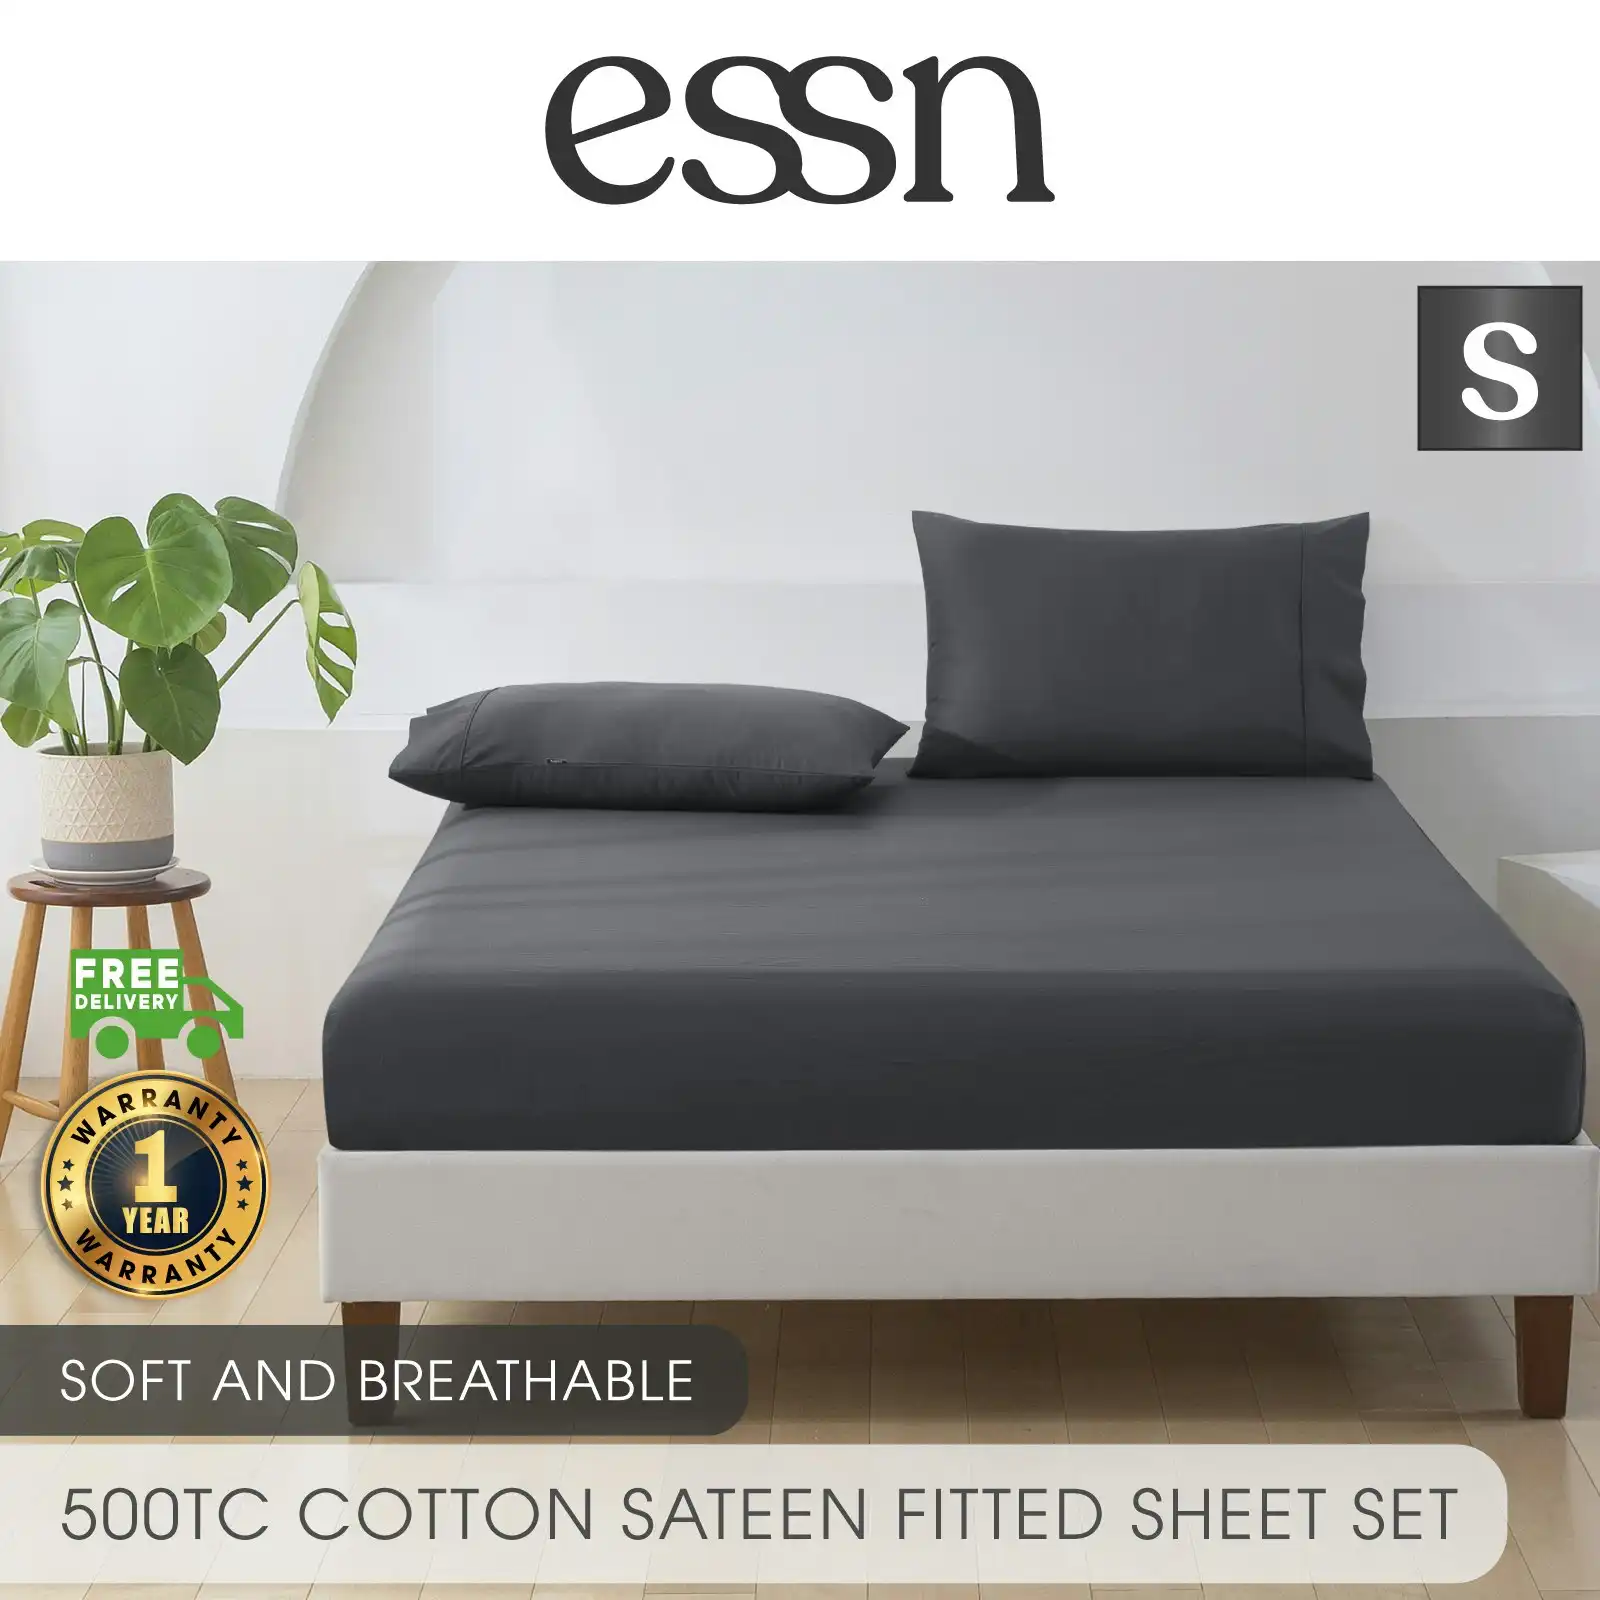 ESSN 500TC Cotton Sateen Fitted Sheet Set Charcoal Single Bed